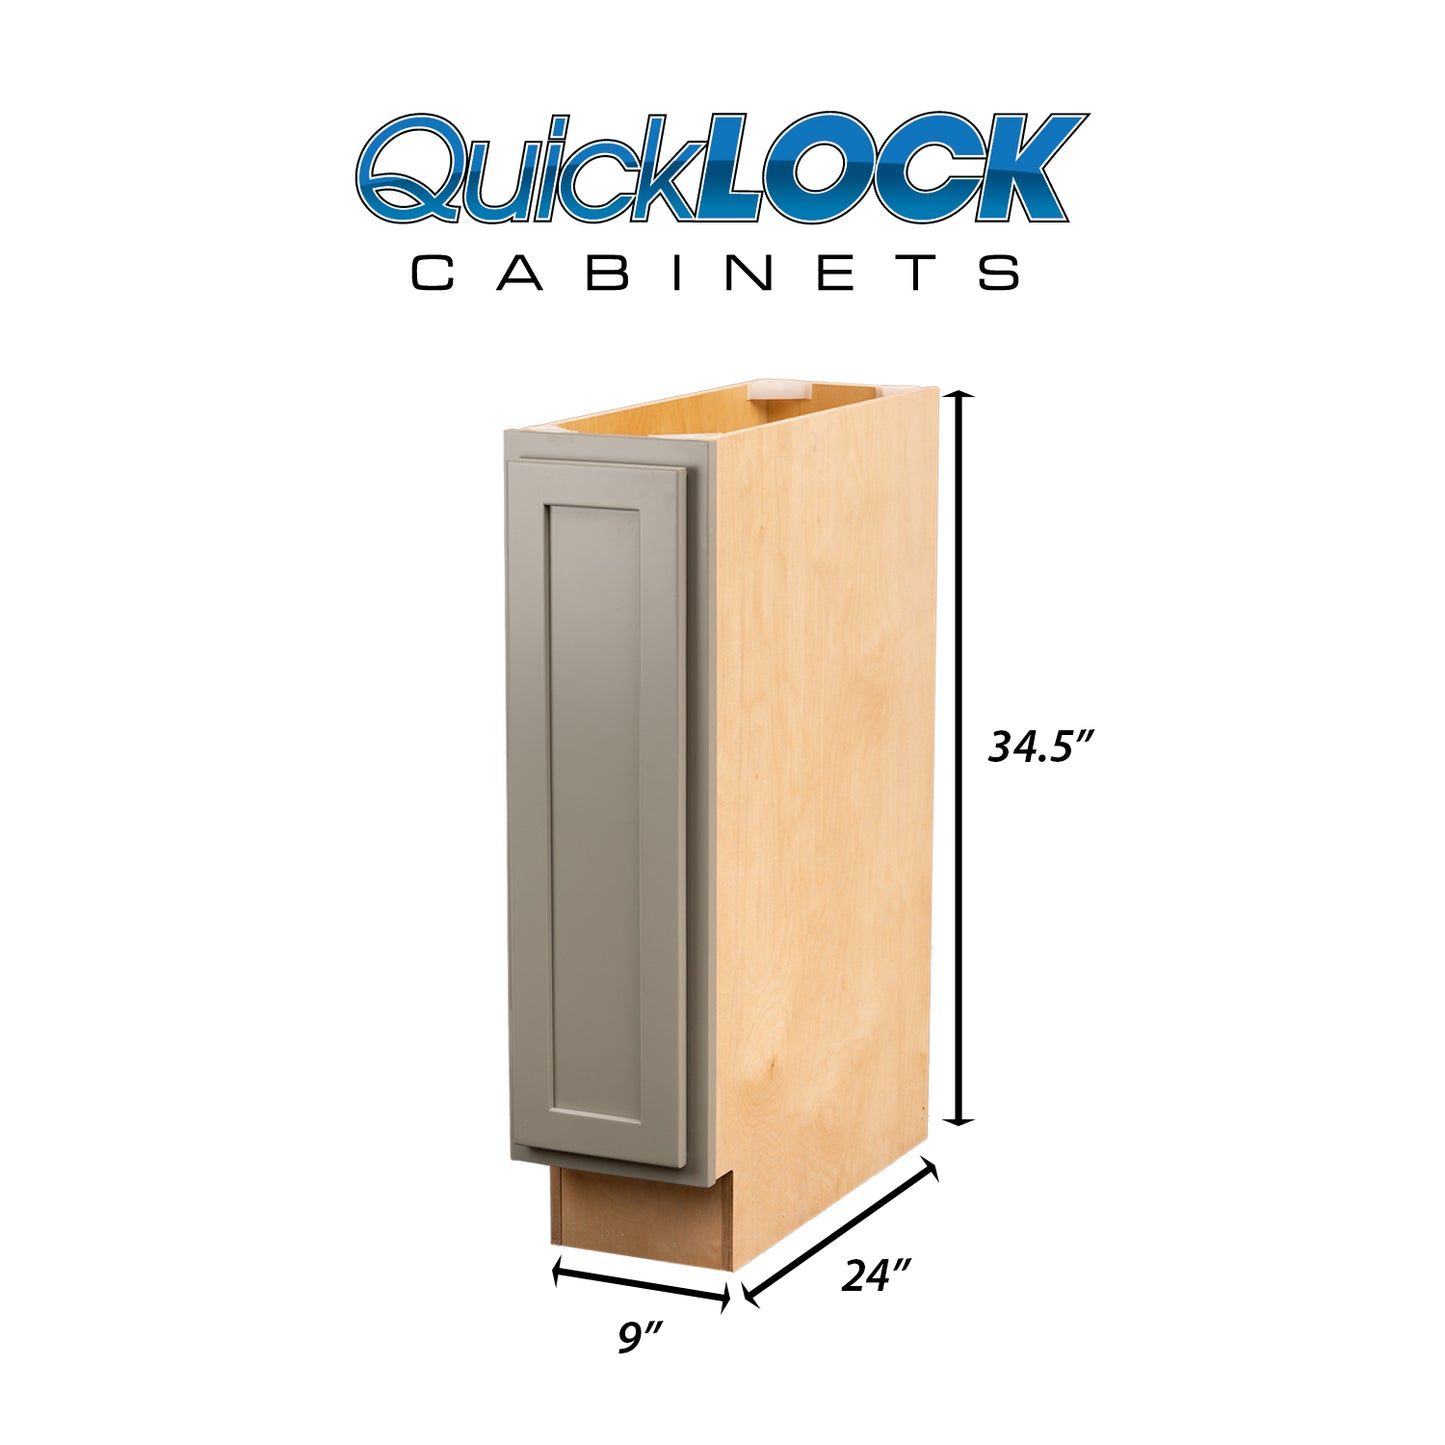 Quicklock RTA (Ready-to-Assemble) Magnetic Grey Base Cabinet | 9"Wx34.5"Hx24"D